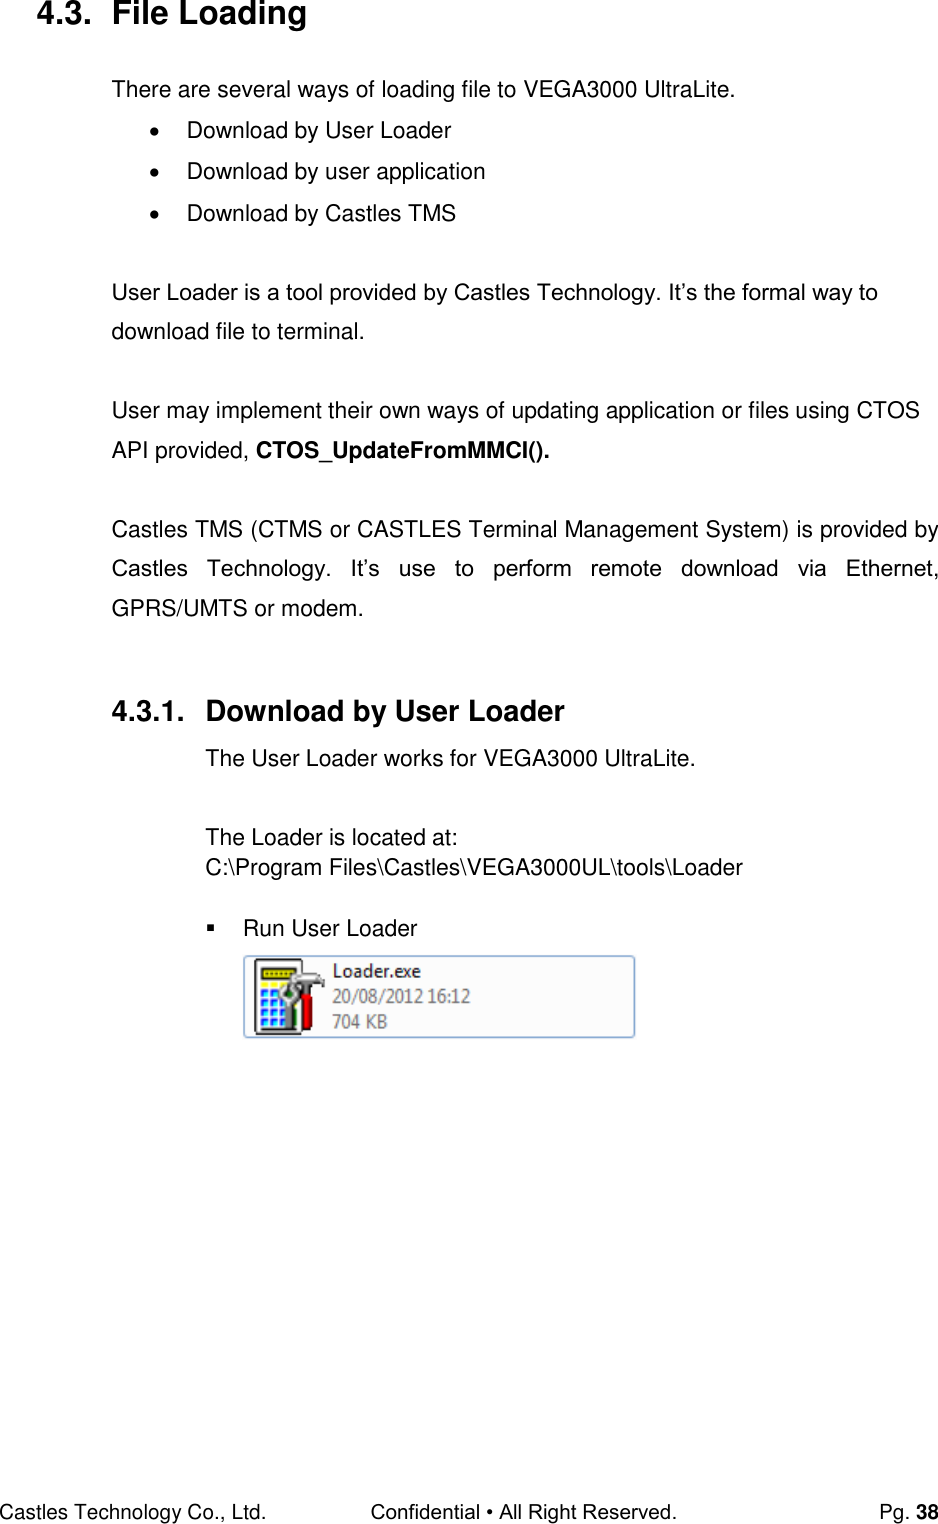 Castles Technology Co., Ltd. Confidential • All Right Reserved.  Pg. 38 4.3.  File Loading There are several ways of loading file to VEGA3000 UltraLite.    Download by User Loader   Download by user application   Download by Castles TMS  User Loader is a tool provided by Castles Technology. It’s the formal way to download file to terminal.  User may implement their own ways of updating application or files using CTOS API provided, CTOS_UpdateFromMMCI().  Castles TMS (CTMS or CASTLES Terminal Management System) is provided by Castles  Technology.  It’s  use  to  perform  remote  download  via  Ethernet,  GPRS/UMTS or modem.  4.3.1.  Download by User Loader The User Loader works for VEGA3000 UltraLite.  The Loader is located at: C:\Program Files\Castles\VEGA3000UL\tools\Loader    Run User Loader        